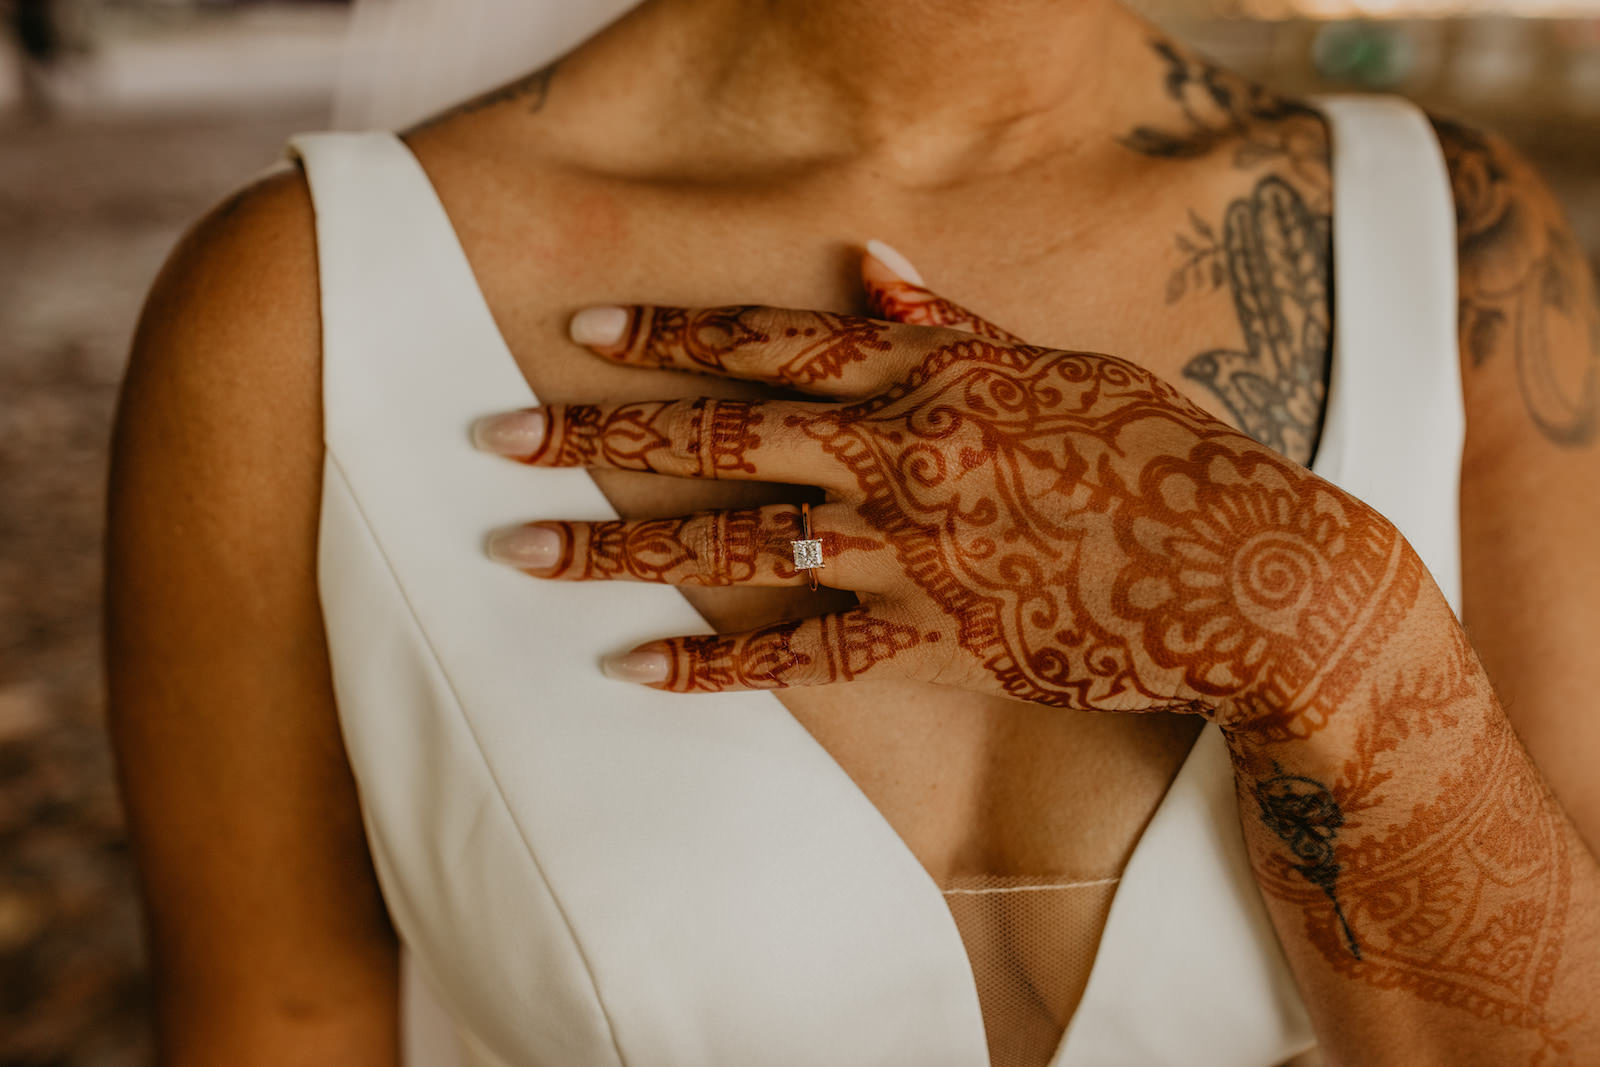 Intimate Elopement Wedding, Brides Hands with Henna Tattoo and Princess Cut Diamond Engagement Ring | Tampa Bay Wedding Planner Elope Tampa Bay